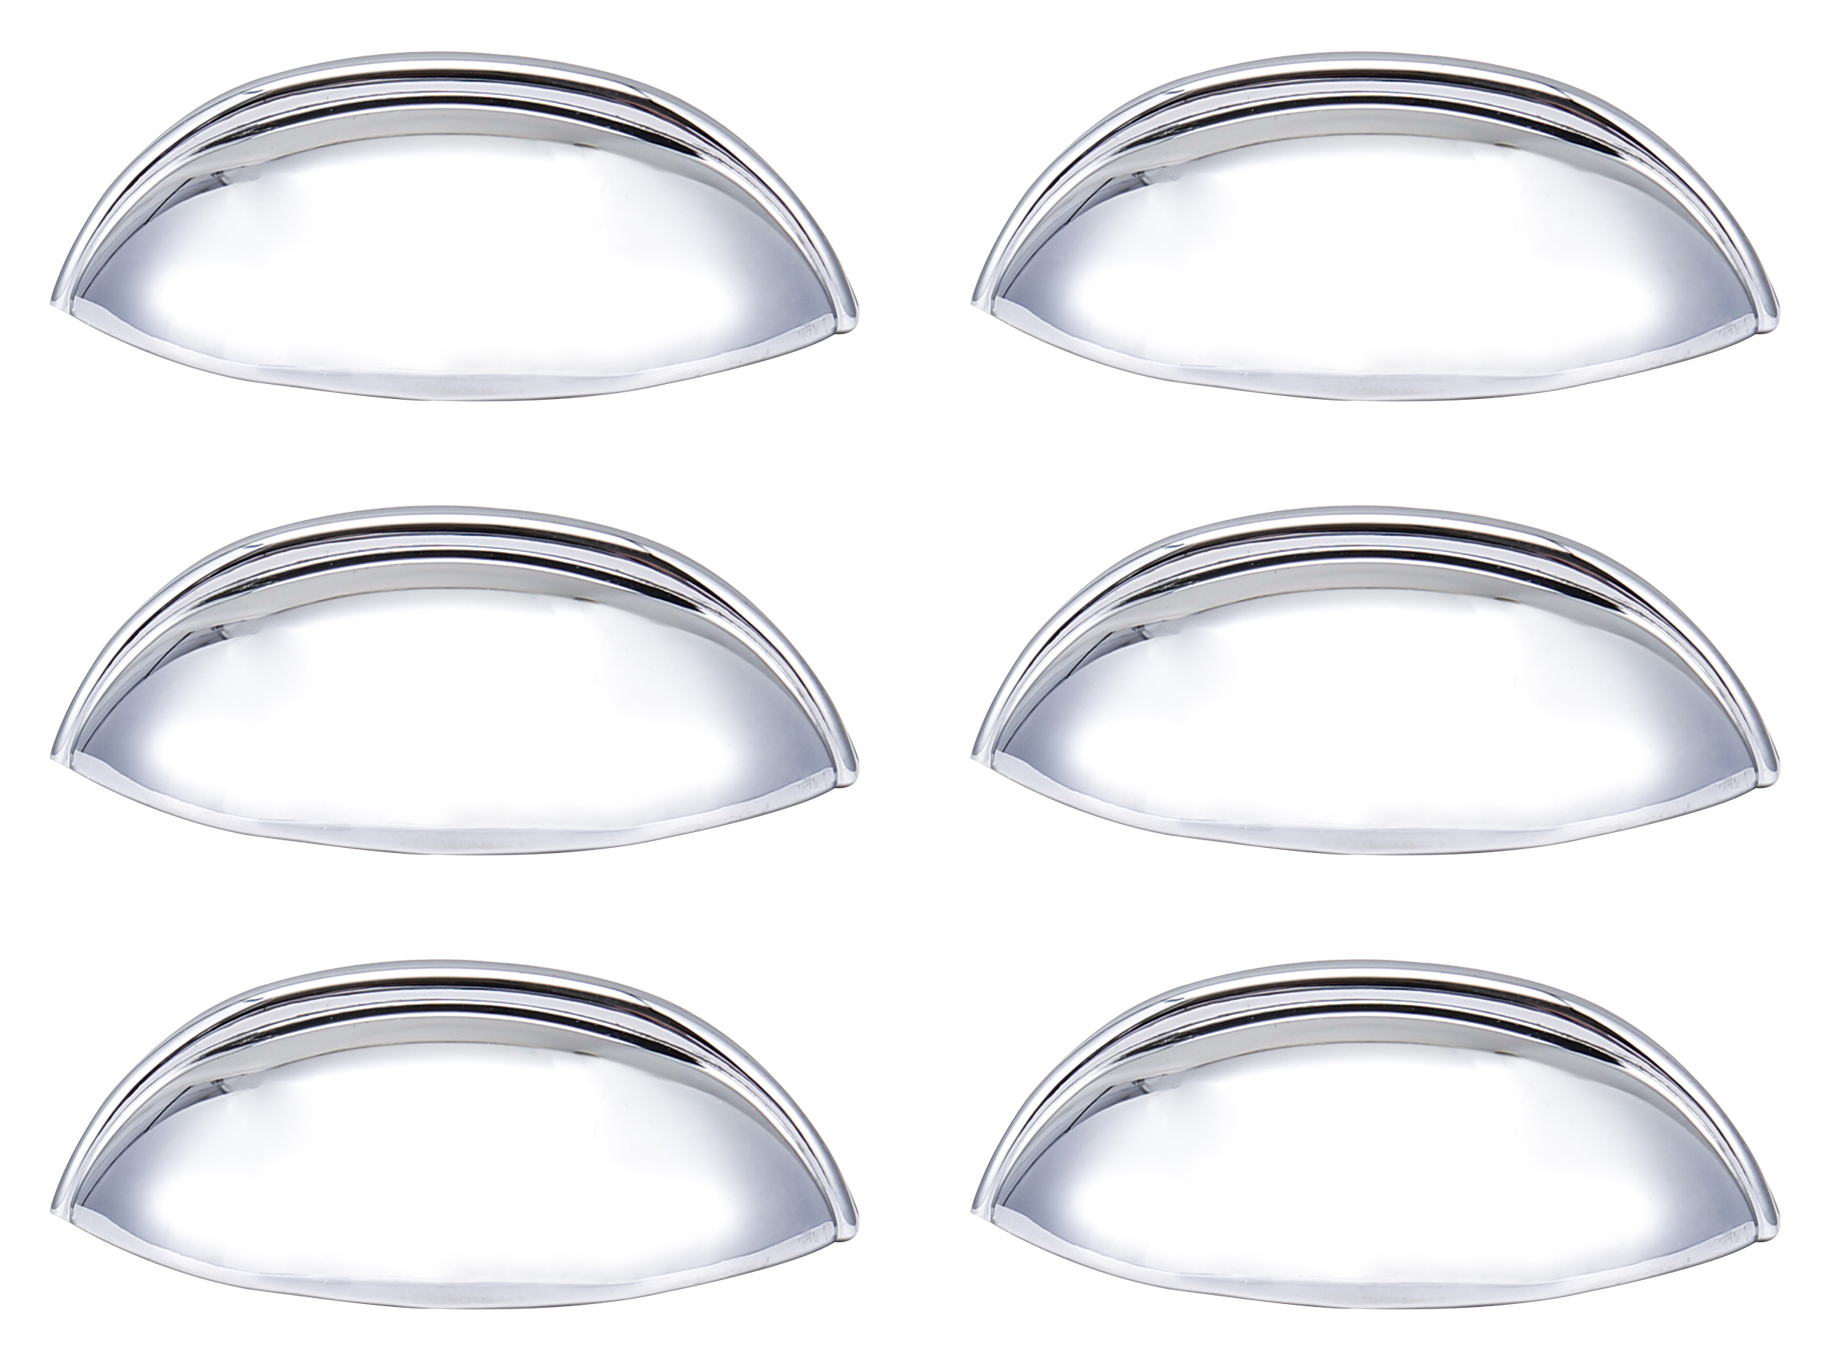 Cup Polished Chrome Cabinet Handle - 84mm - Pack of 6